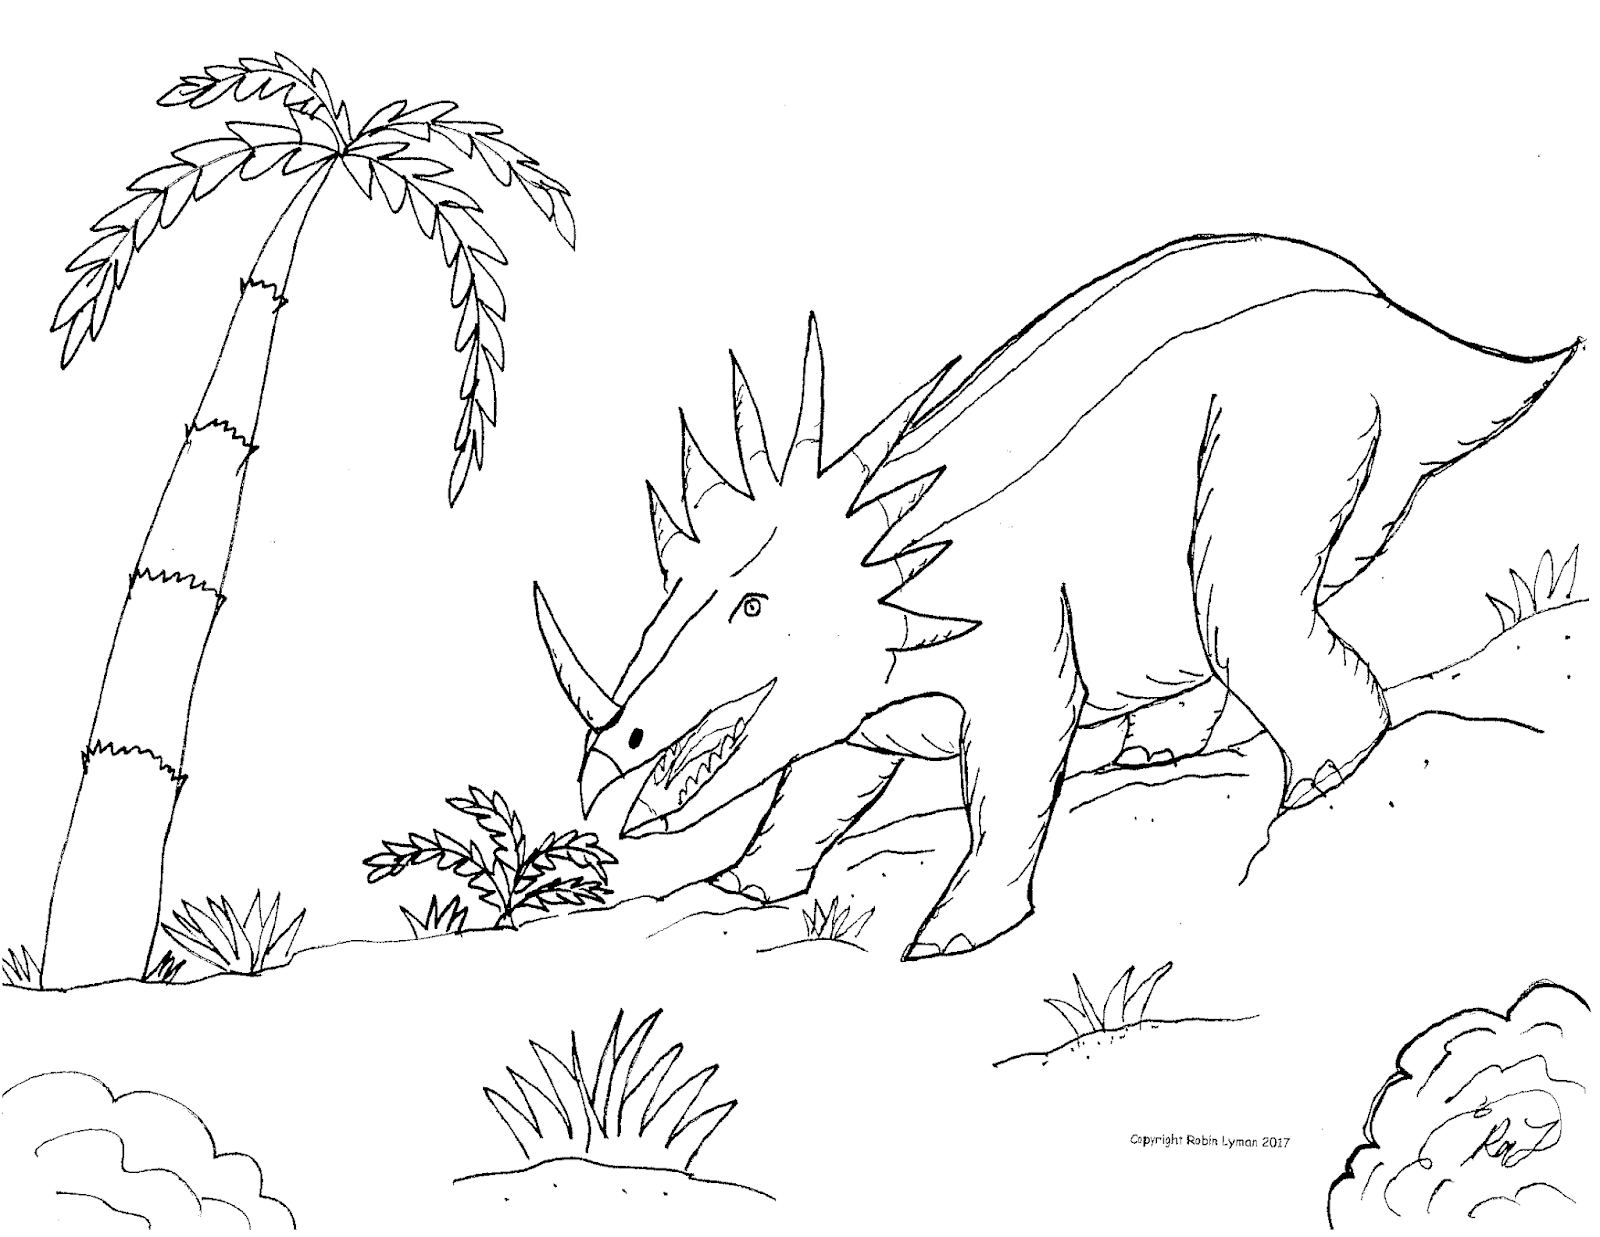 Download Robin's Great Coloring Pages: Triceratops and some other Ceratopsian Dinosaurs